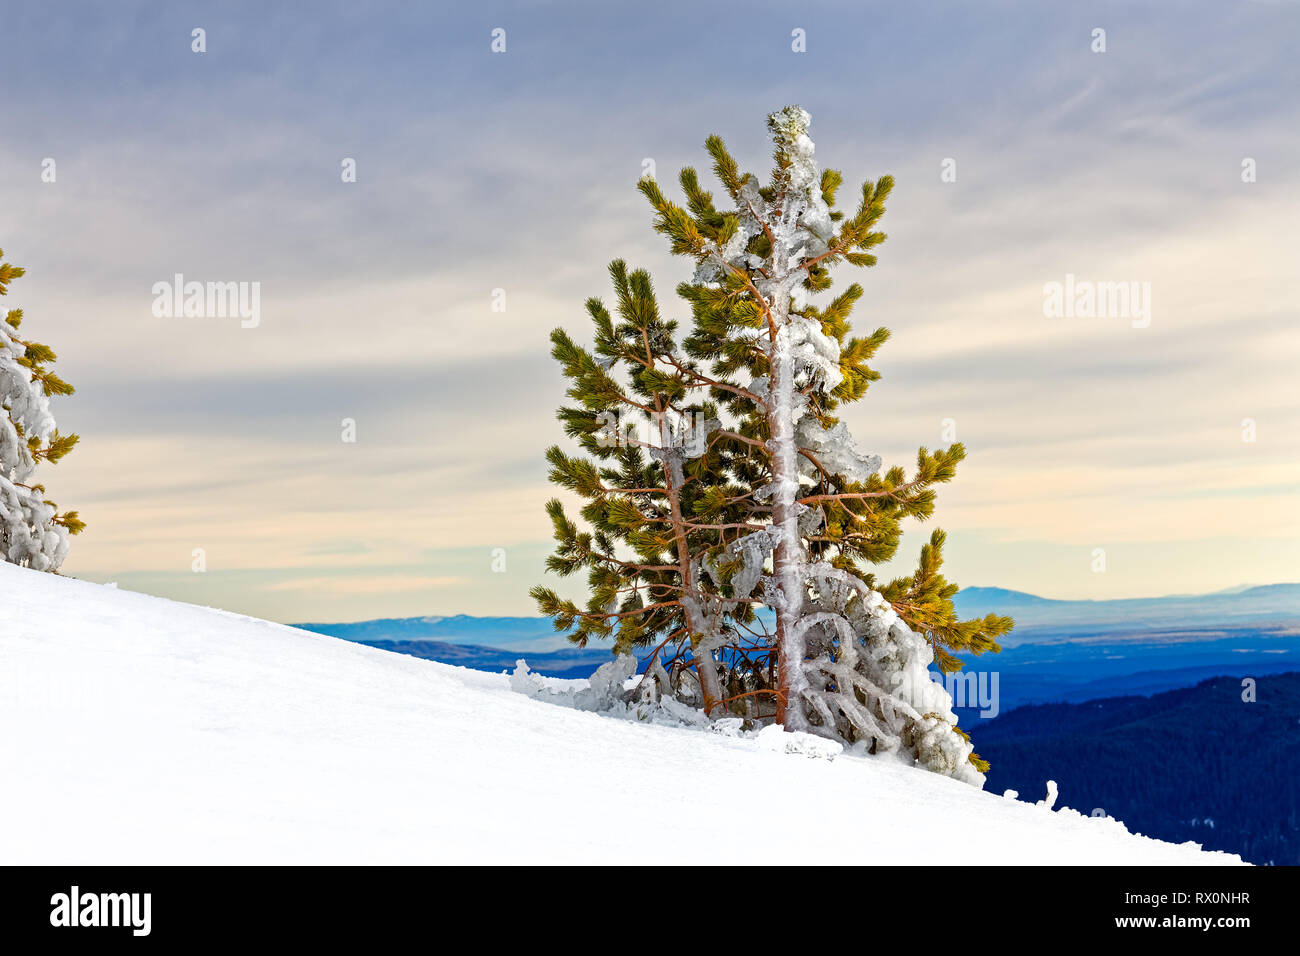 43,489.03976 windblown ice covered icy 8' tall conifer tree, fresh snow on ground, attractive cloudy sky background Stock Photo